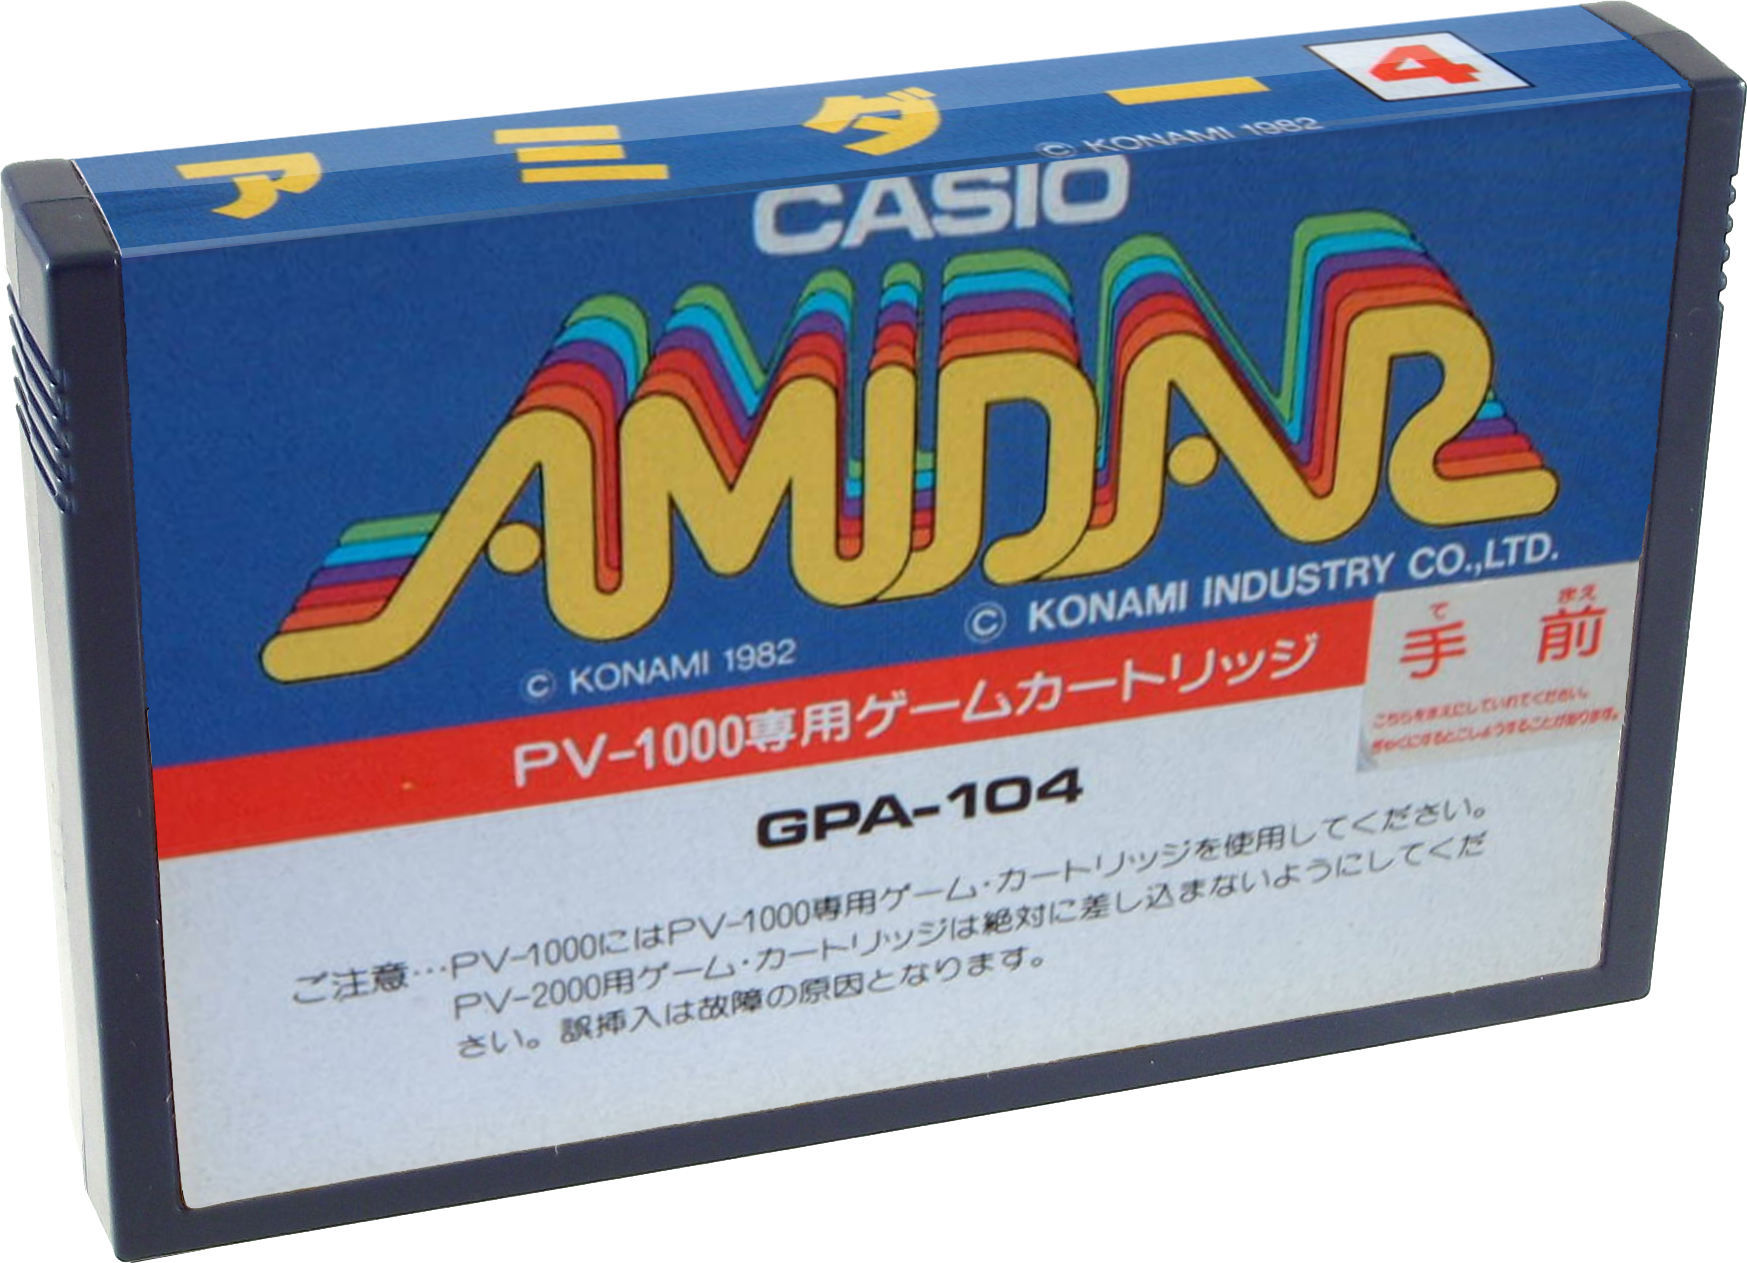 More information about "Casio PV1000 3D Cart"